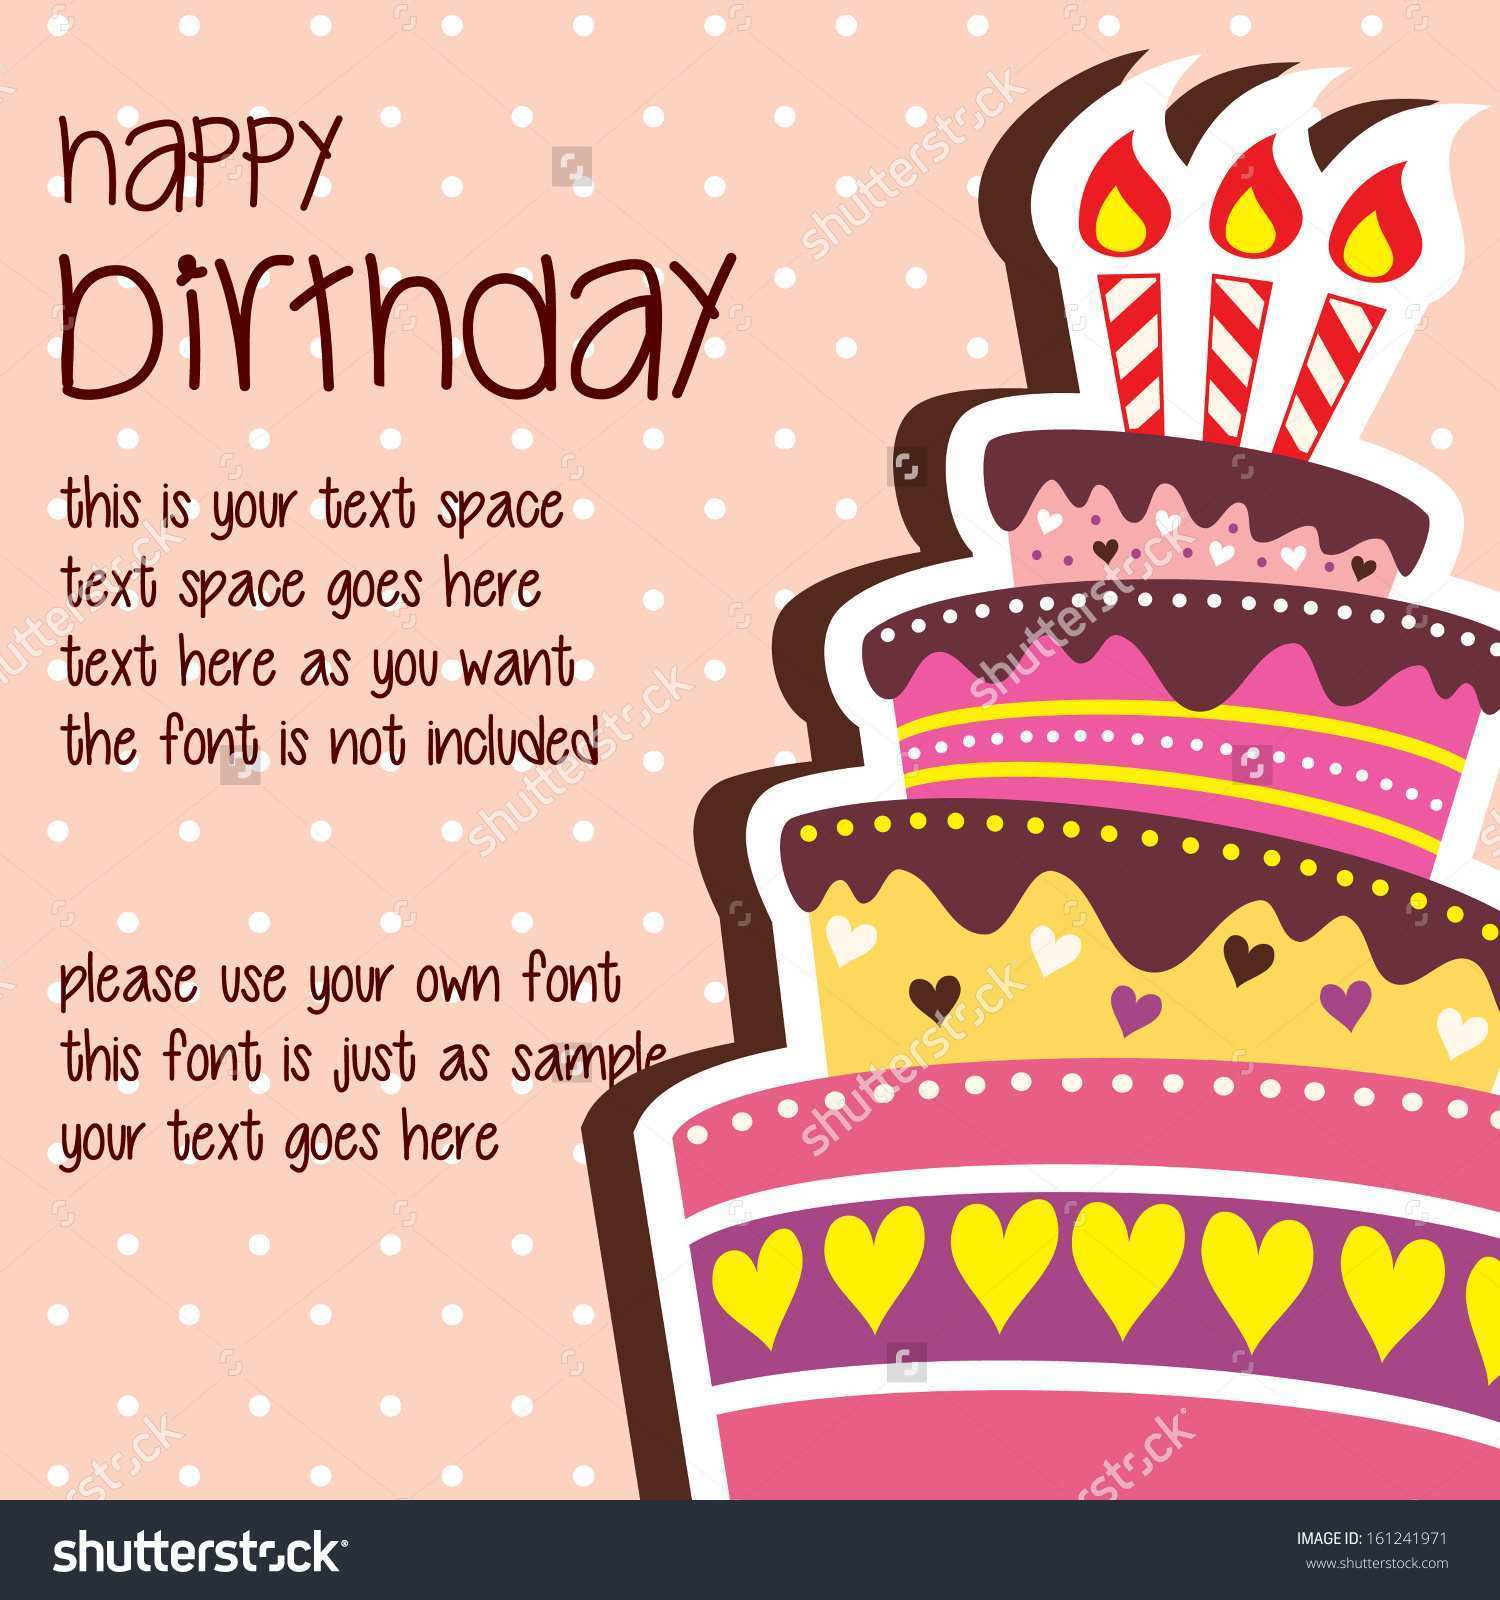 30 Creative Birthday Card Layout Templates by Birthday Card Layout Templates